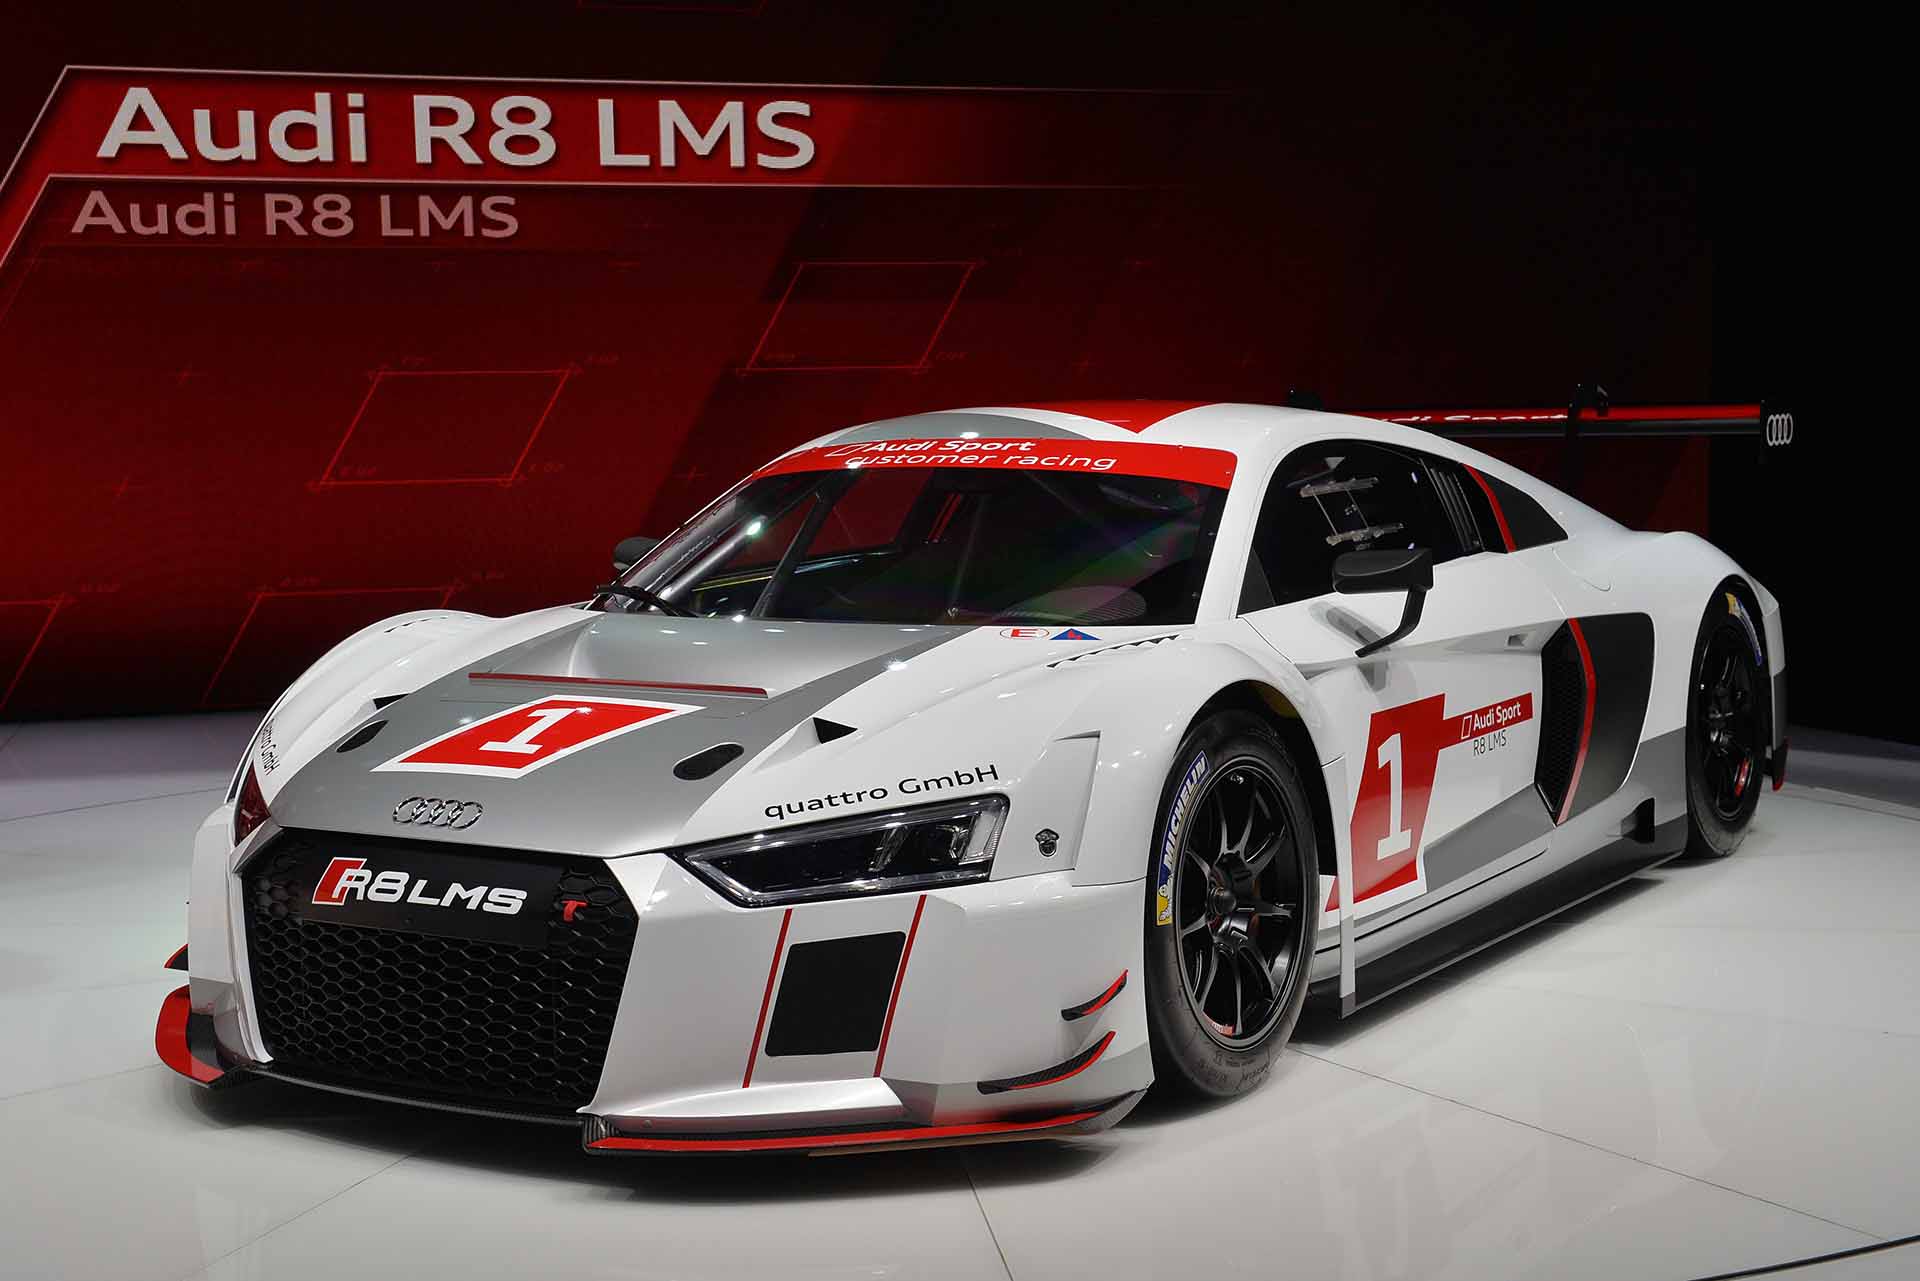 Unrivaled Performance: The 2015 Audi R8 LMX